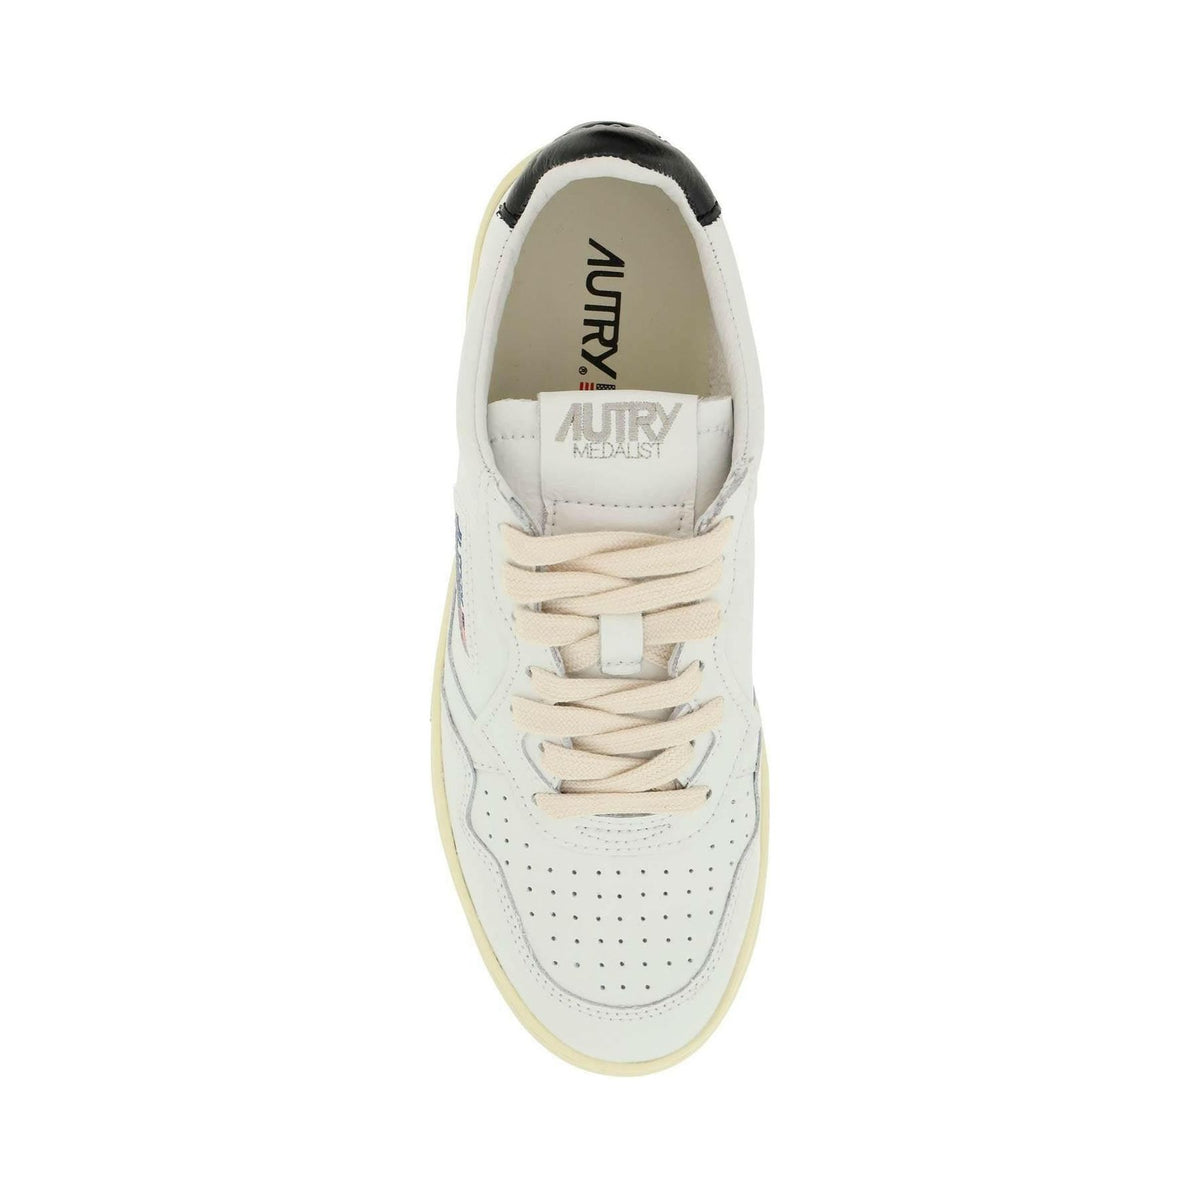 AUTRY - White and Black Leather Medalist Low Sneakers - JOHN JULIA